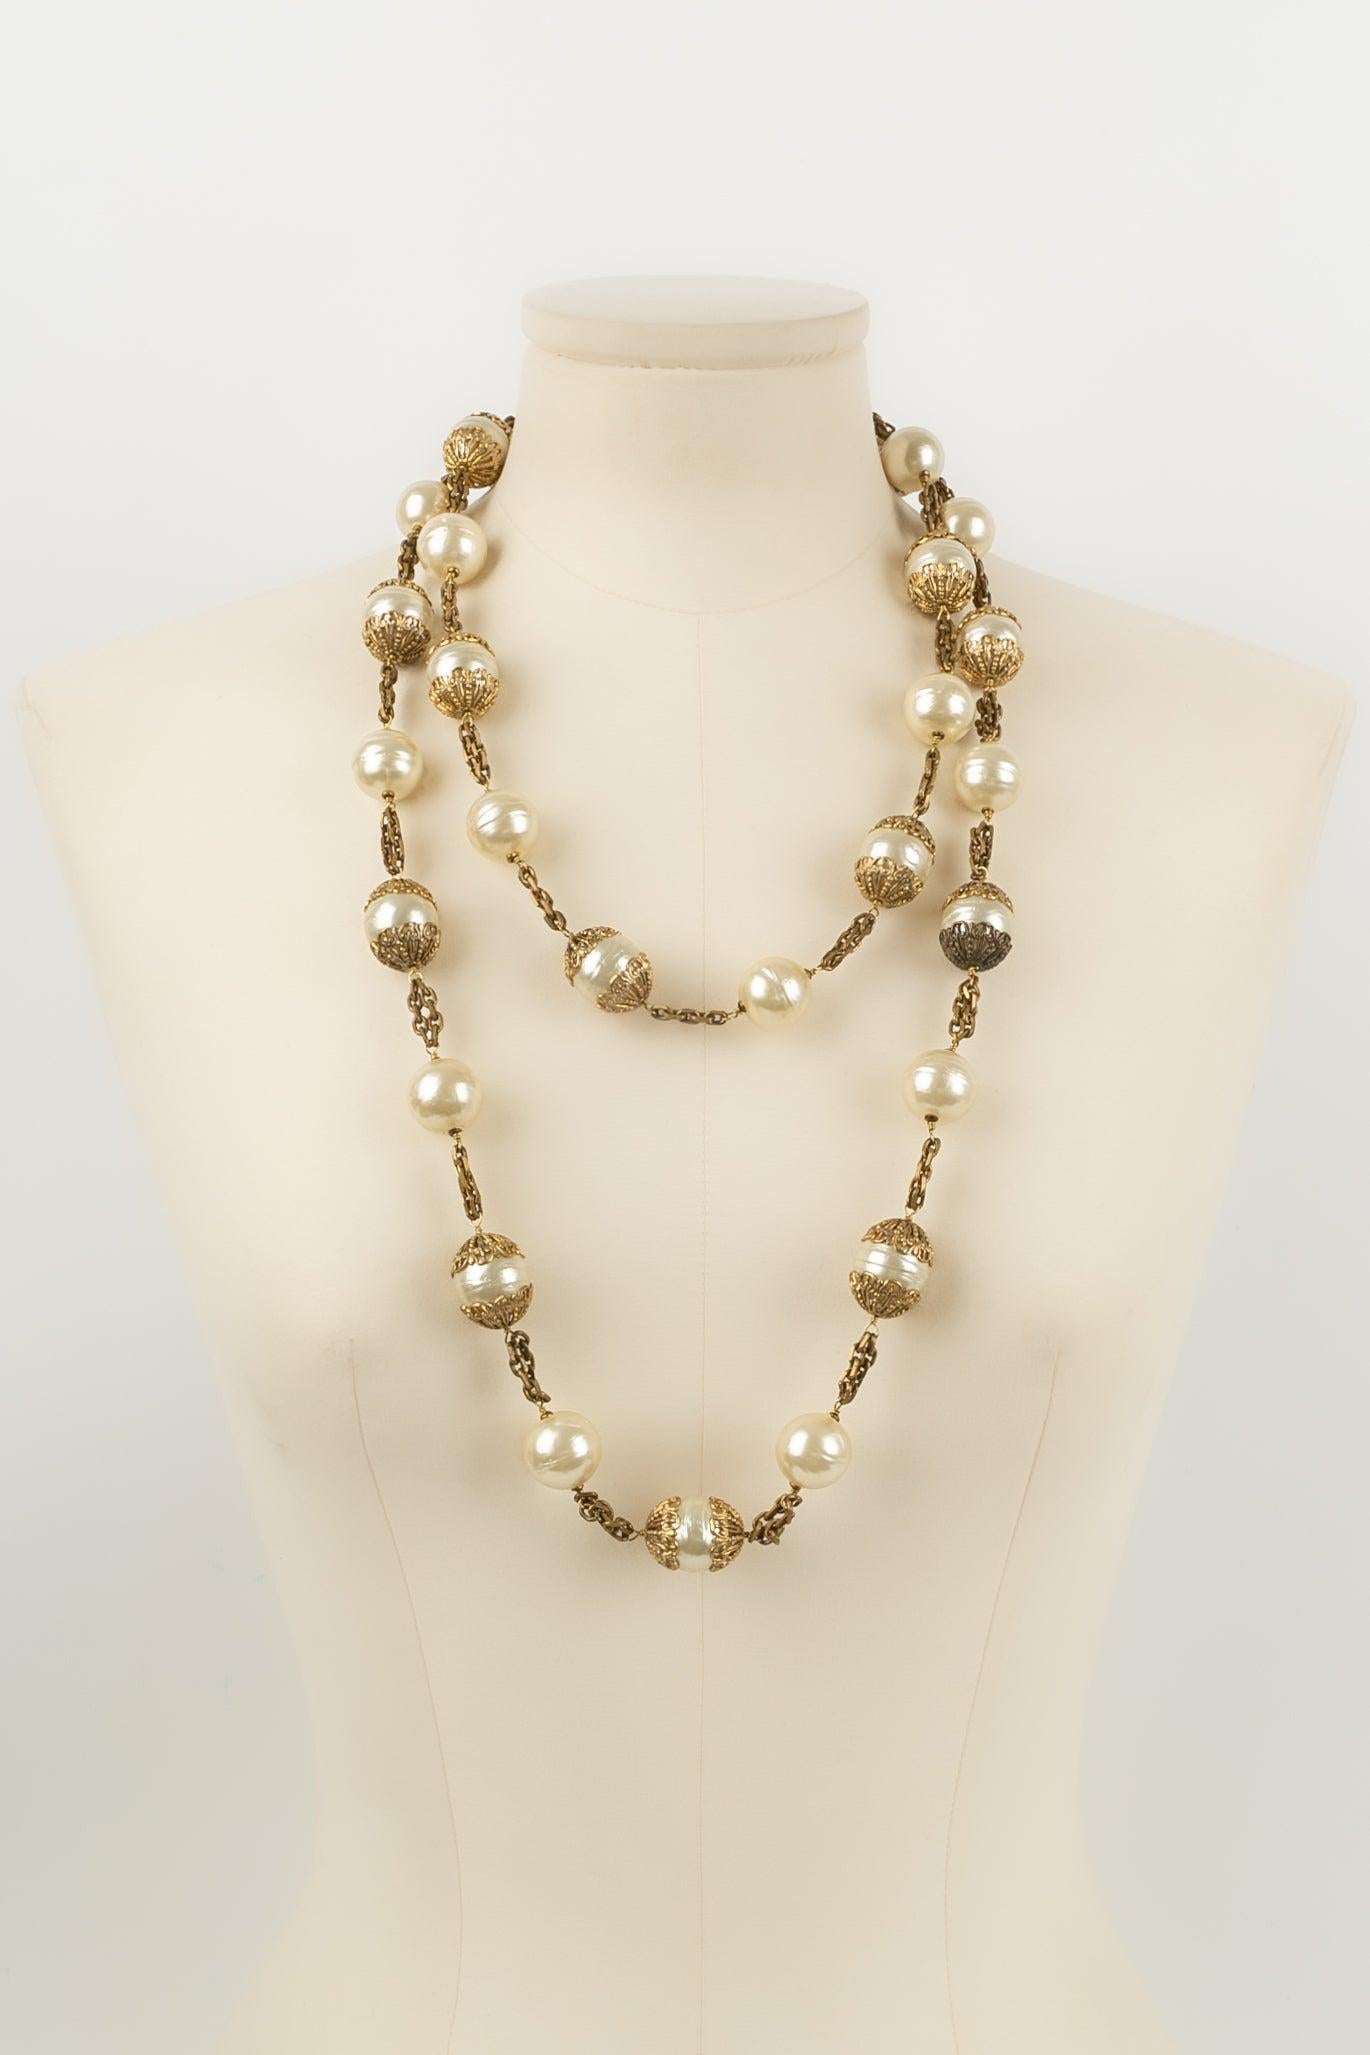 Chanel - Gold metal necklace with pearls.
Collection Spring-Summer 1996.

Additional information: 
Dimensions: Length: 140 cm
Condition: Very good condition

Seller Ref number: CB66